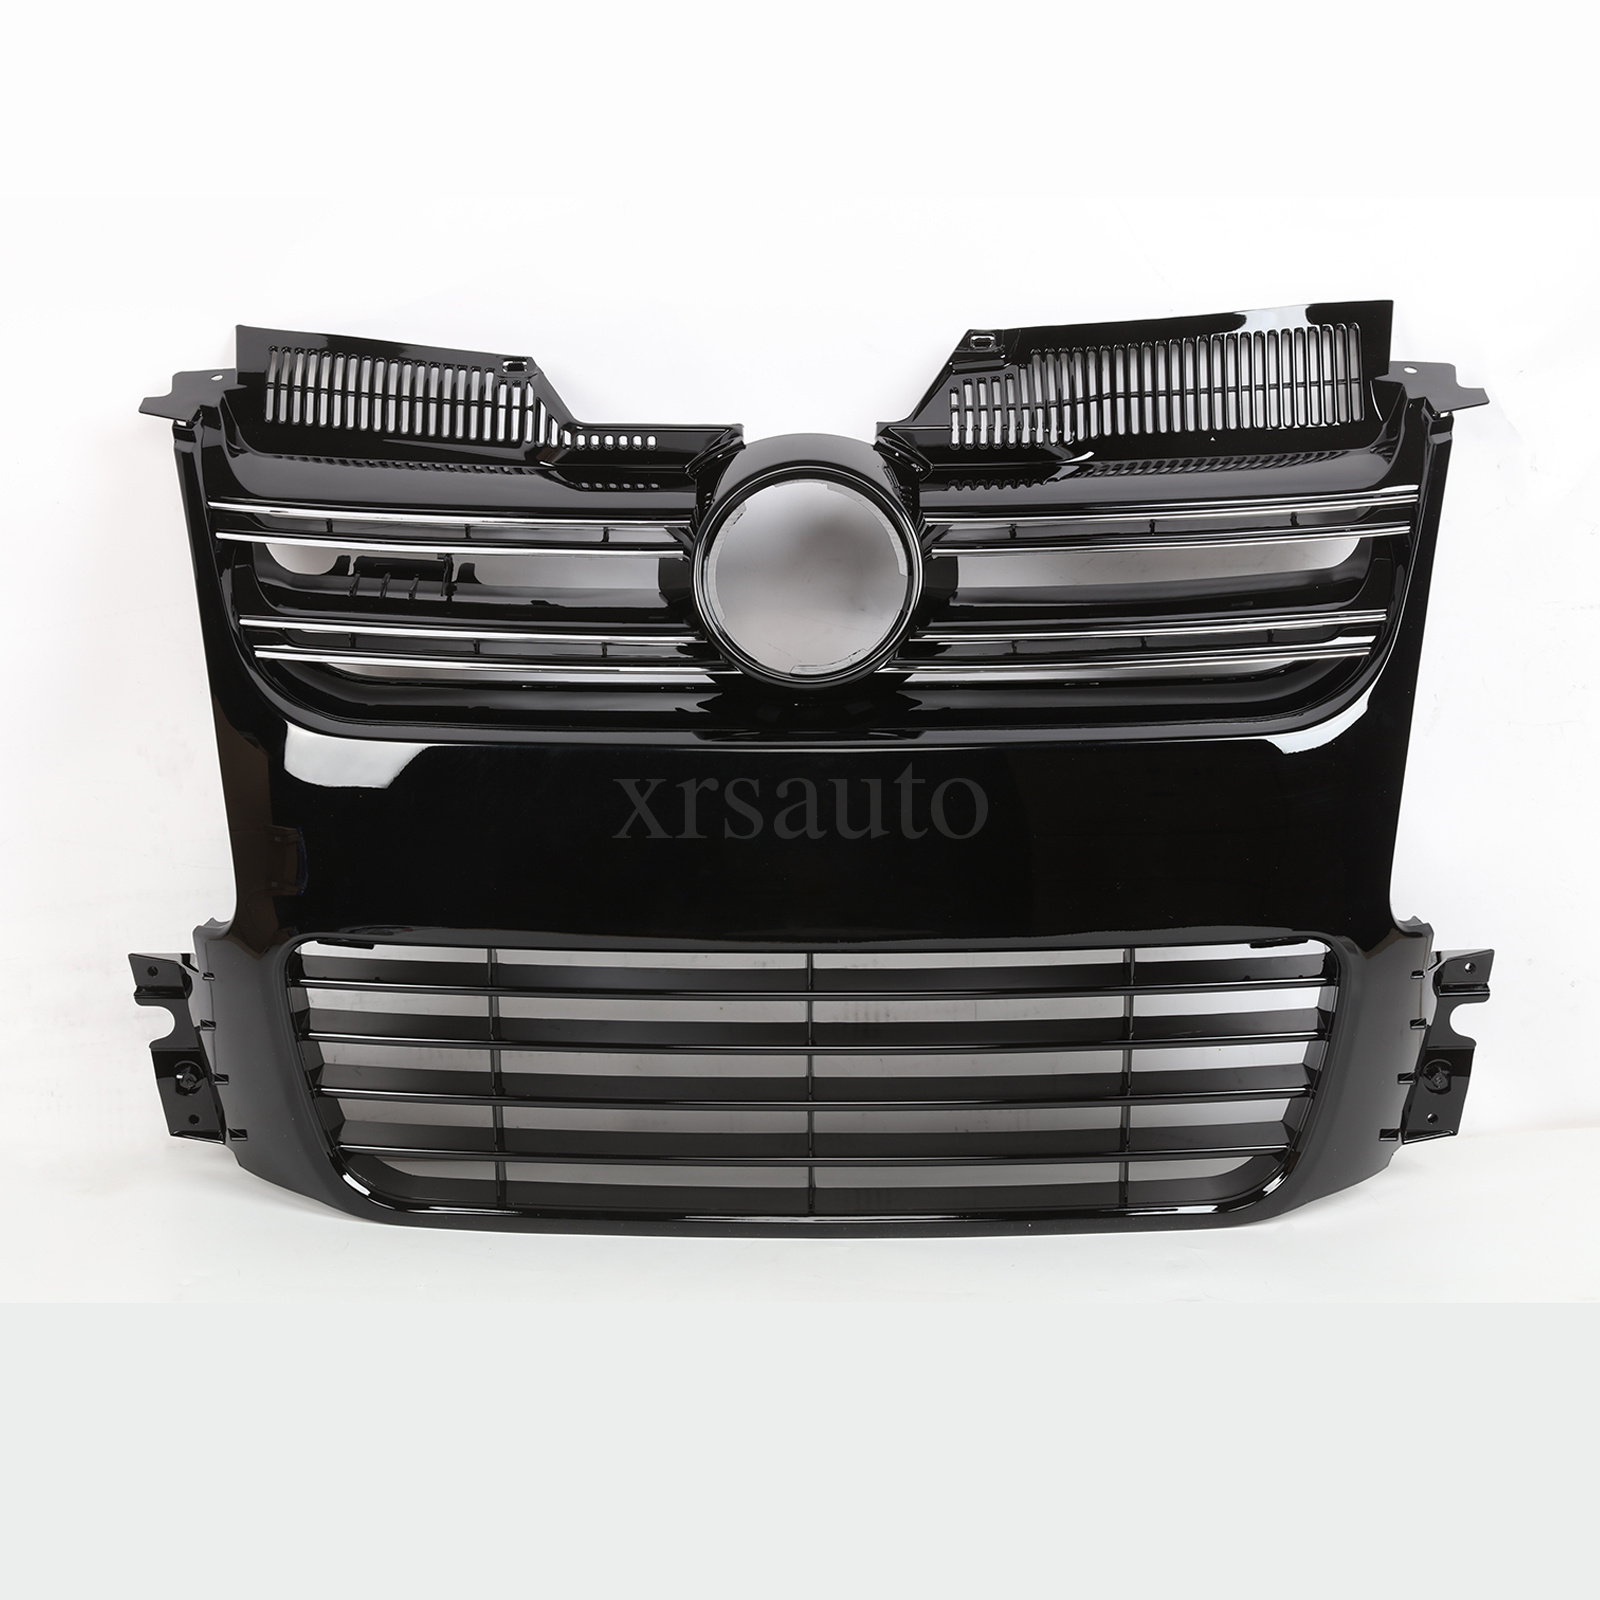 R Style Front Bumper Cover W/ Grille For Volkswagen Golf 5 VW MK5 2003-2008  | eBay